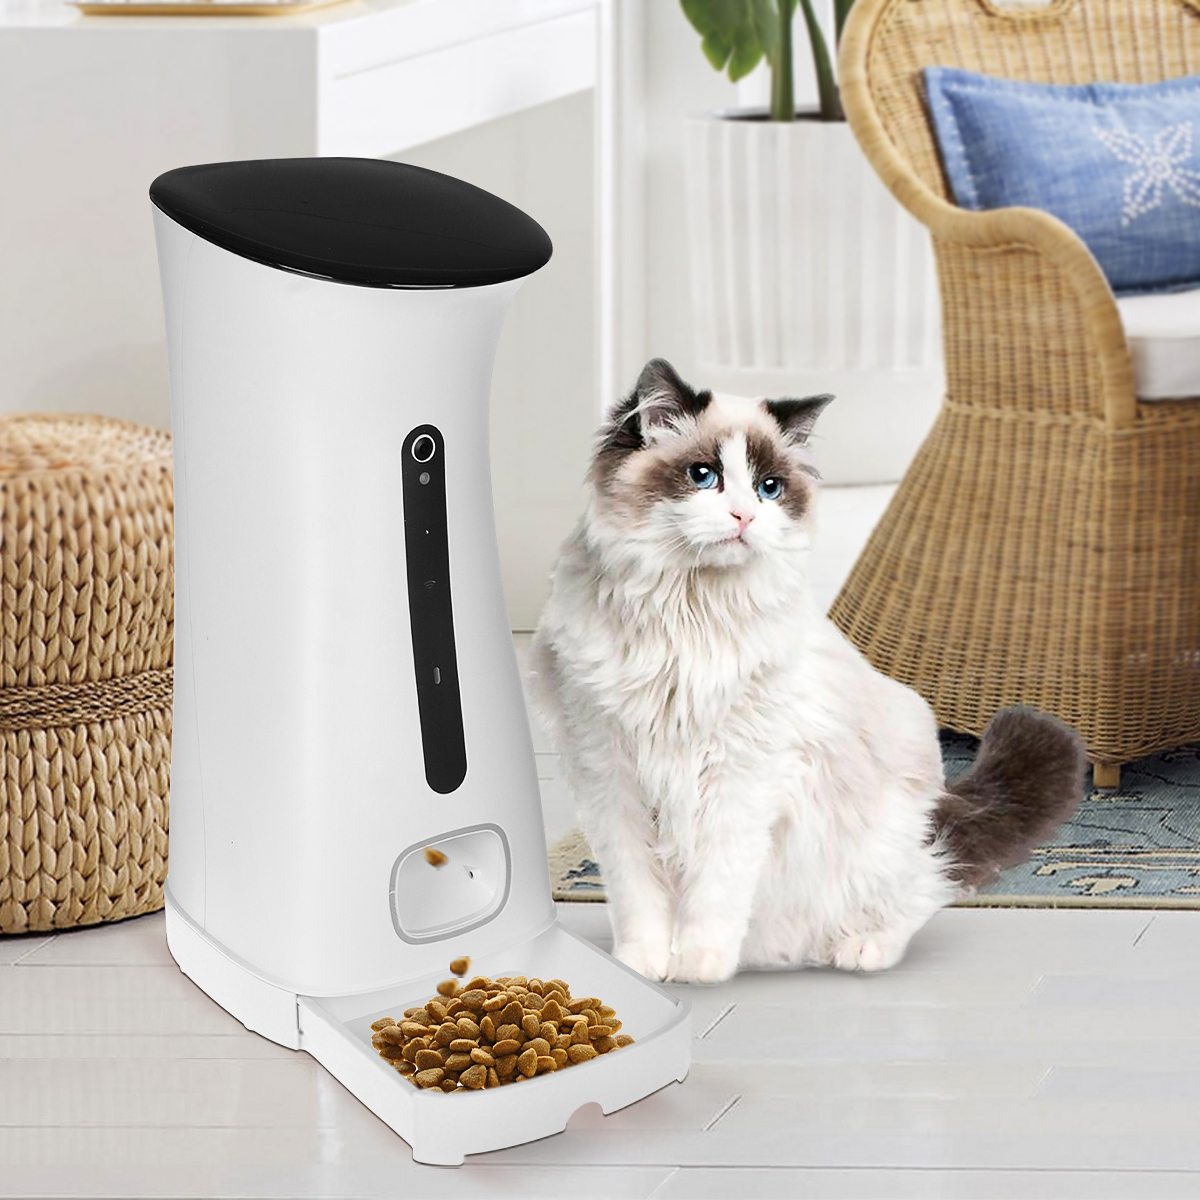 75L-Pet-Feeder-APP-control-Remote-Voice-Interaction-Intelligent-with-Night-Vision-Function-Puppy-Cat-1957235-8